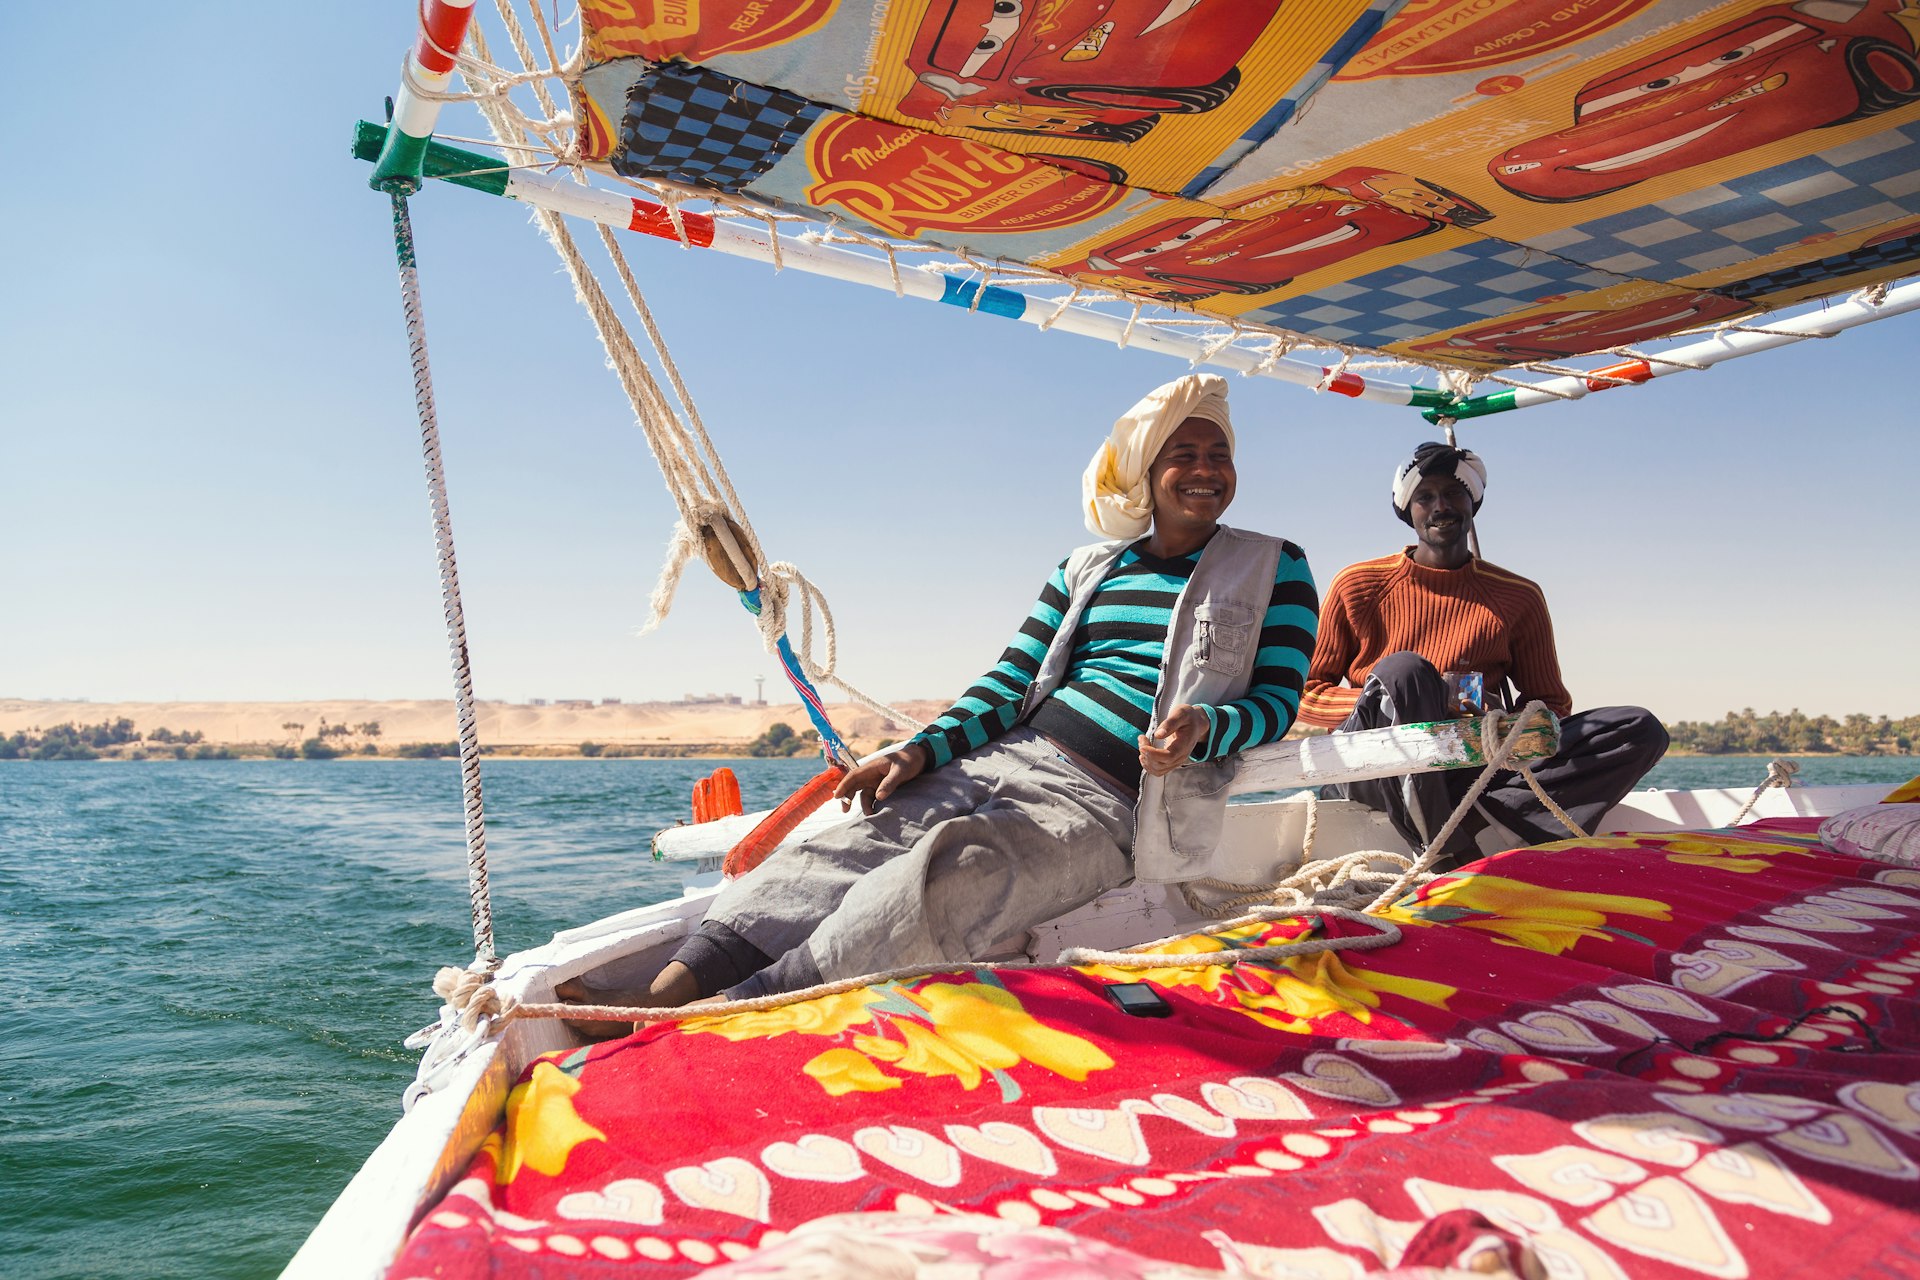 Nubian felucca sailing crew on trip on the Nile for tourists